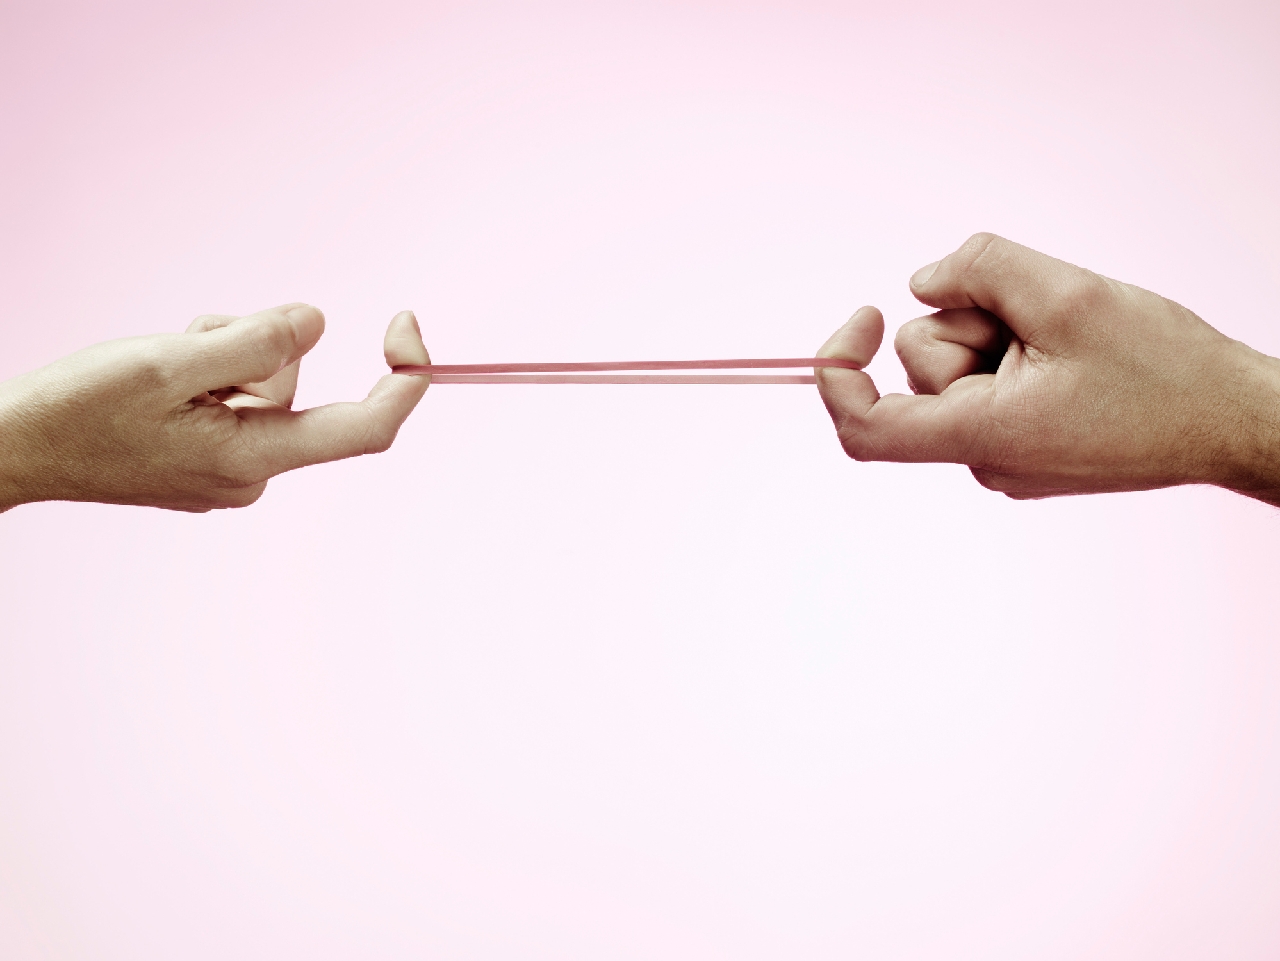 Image of two hands pulling on a rubber band